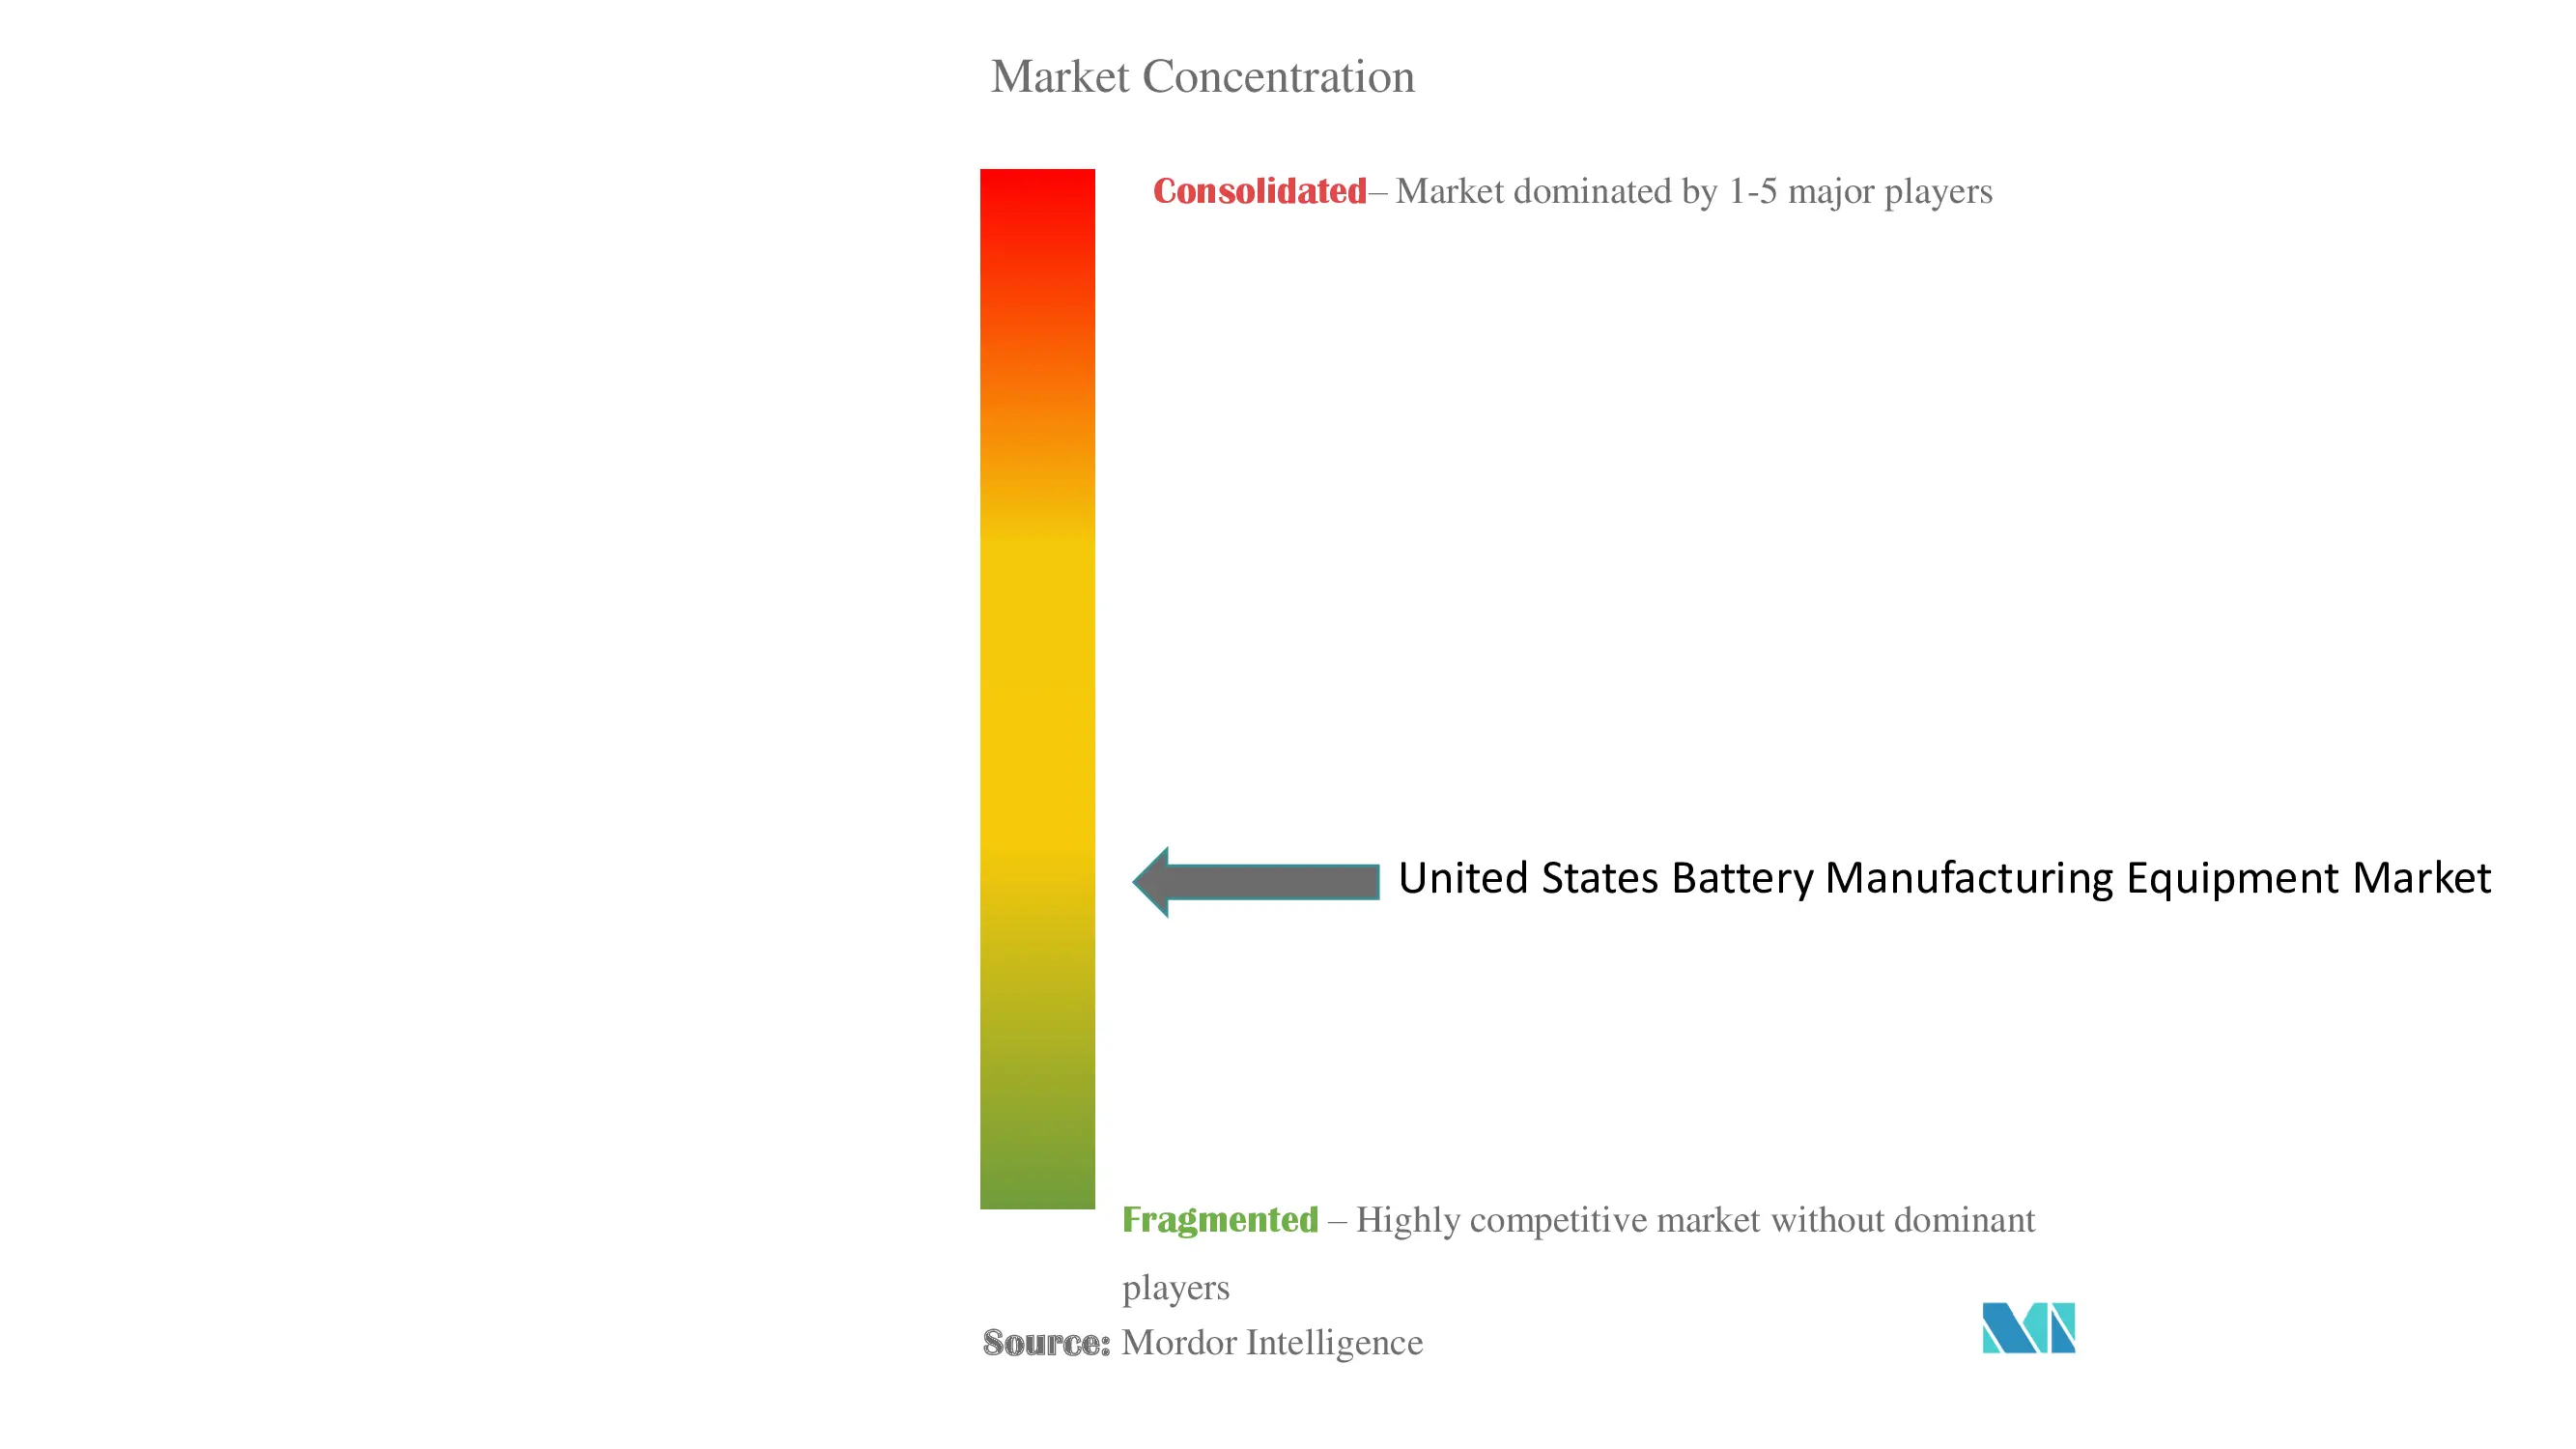 United States Battery Manufacturing Equipment Market Concentration